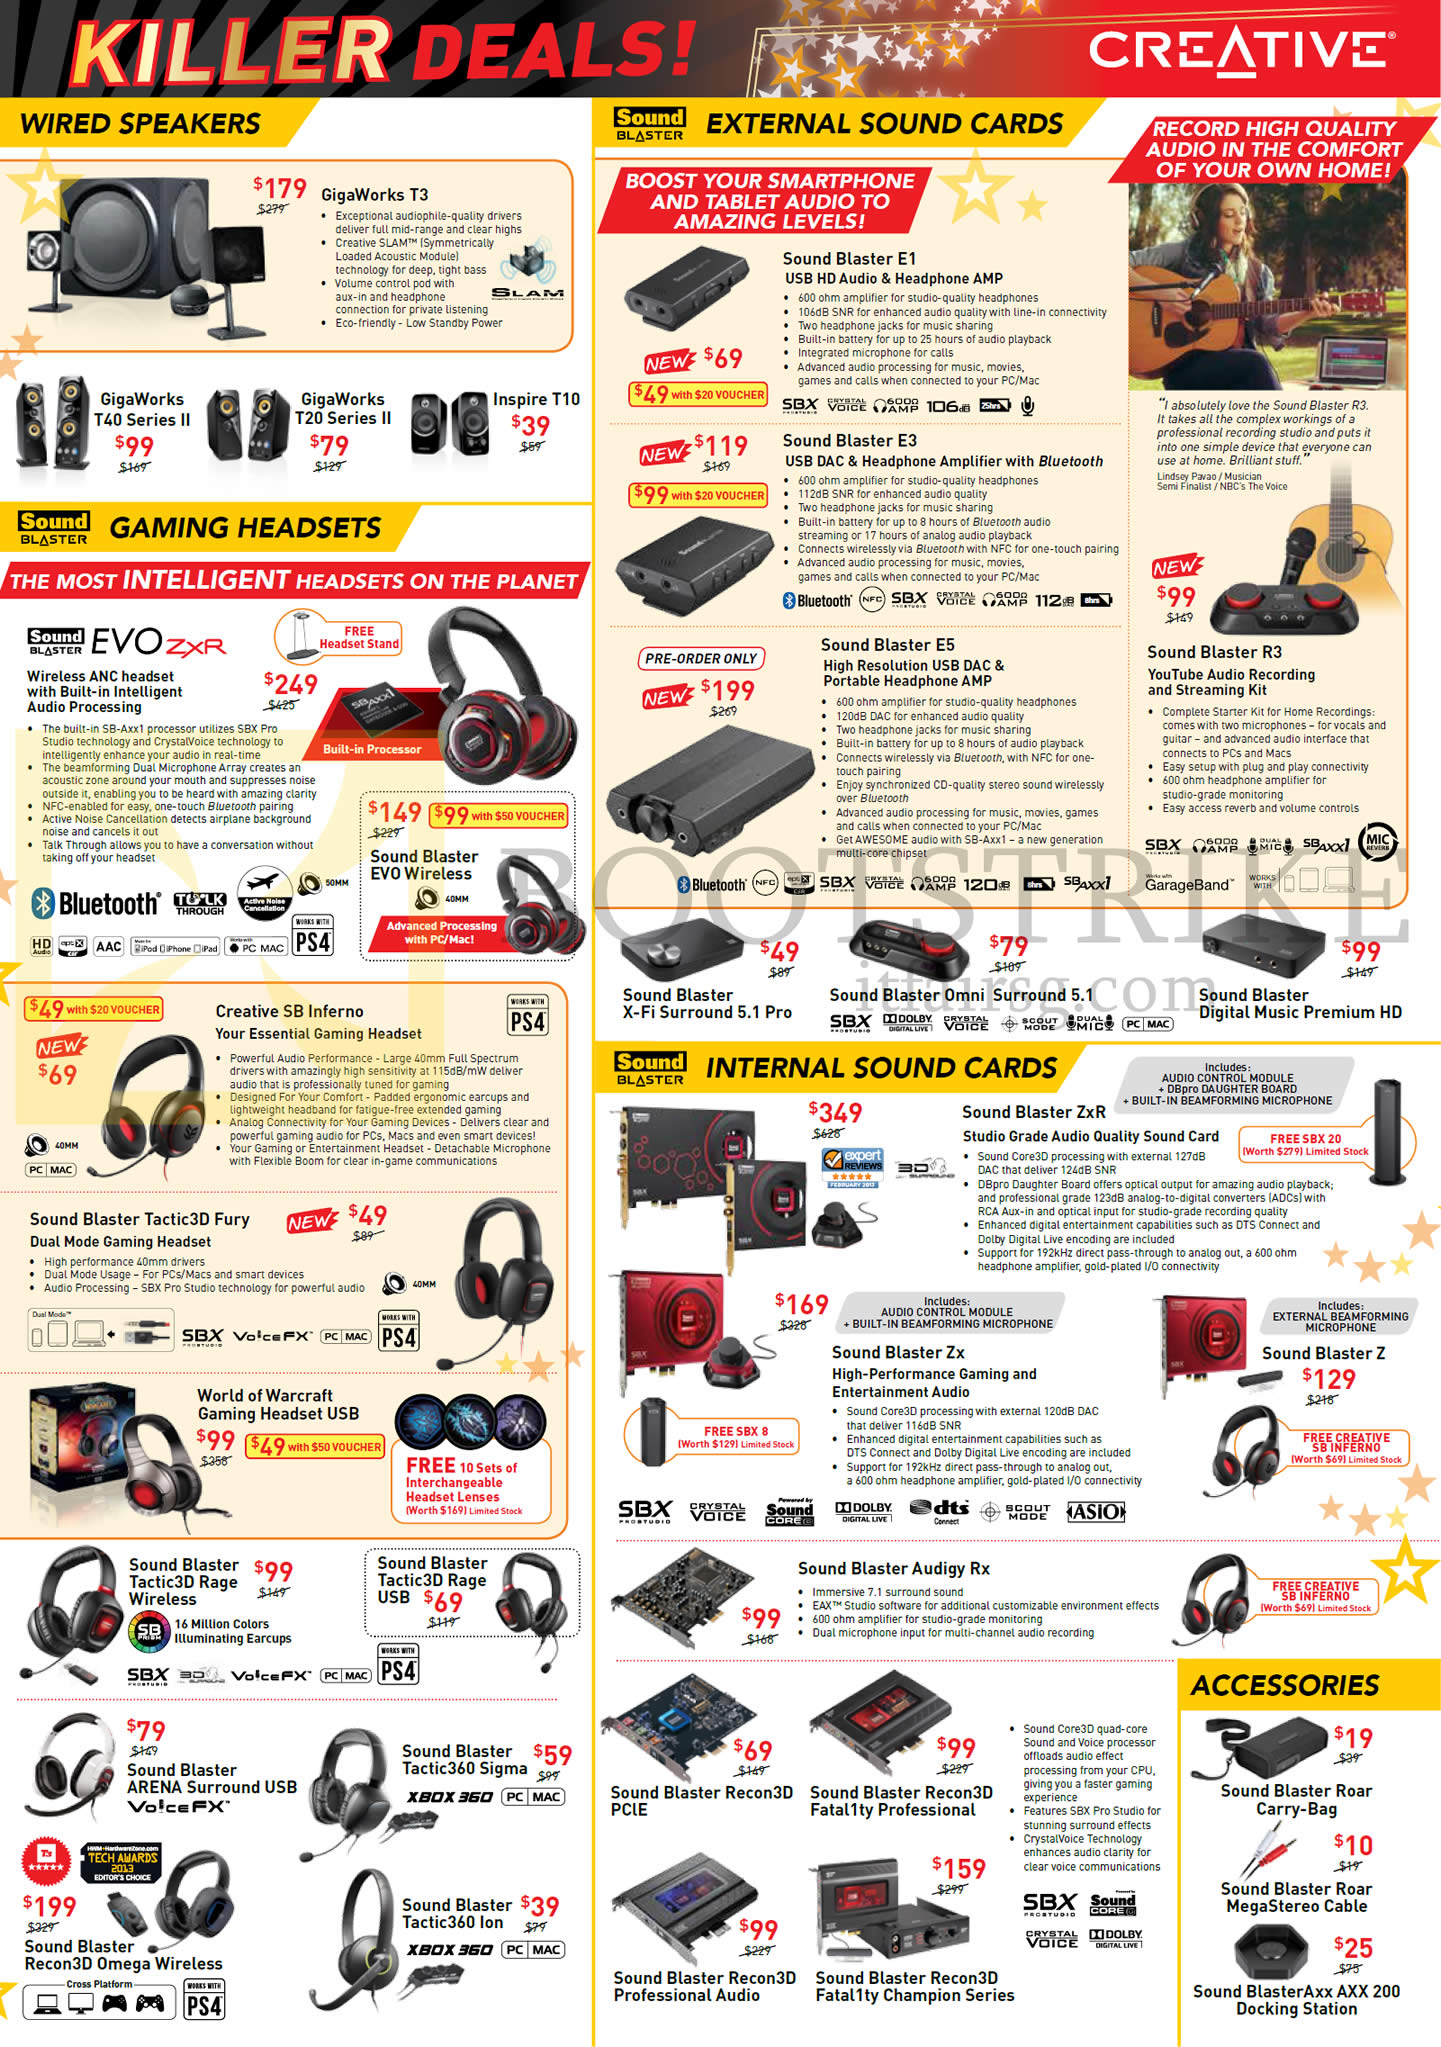 COMEX 2014 price list image brochure of Creative Wired Speakers, External Sound Cards, Headphone, Headsets, Internal Sound Cards, Gigaworks Sound Blaster Evo ZxR Rx Recon3D Arena Tictic3D Inferno Fata1ty E5